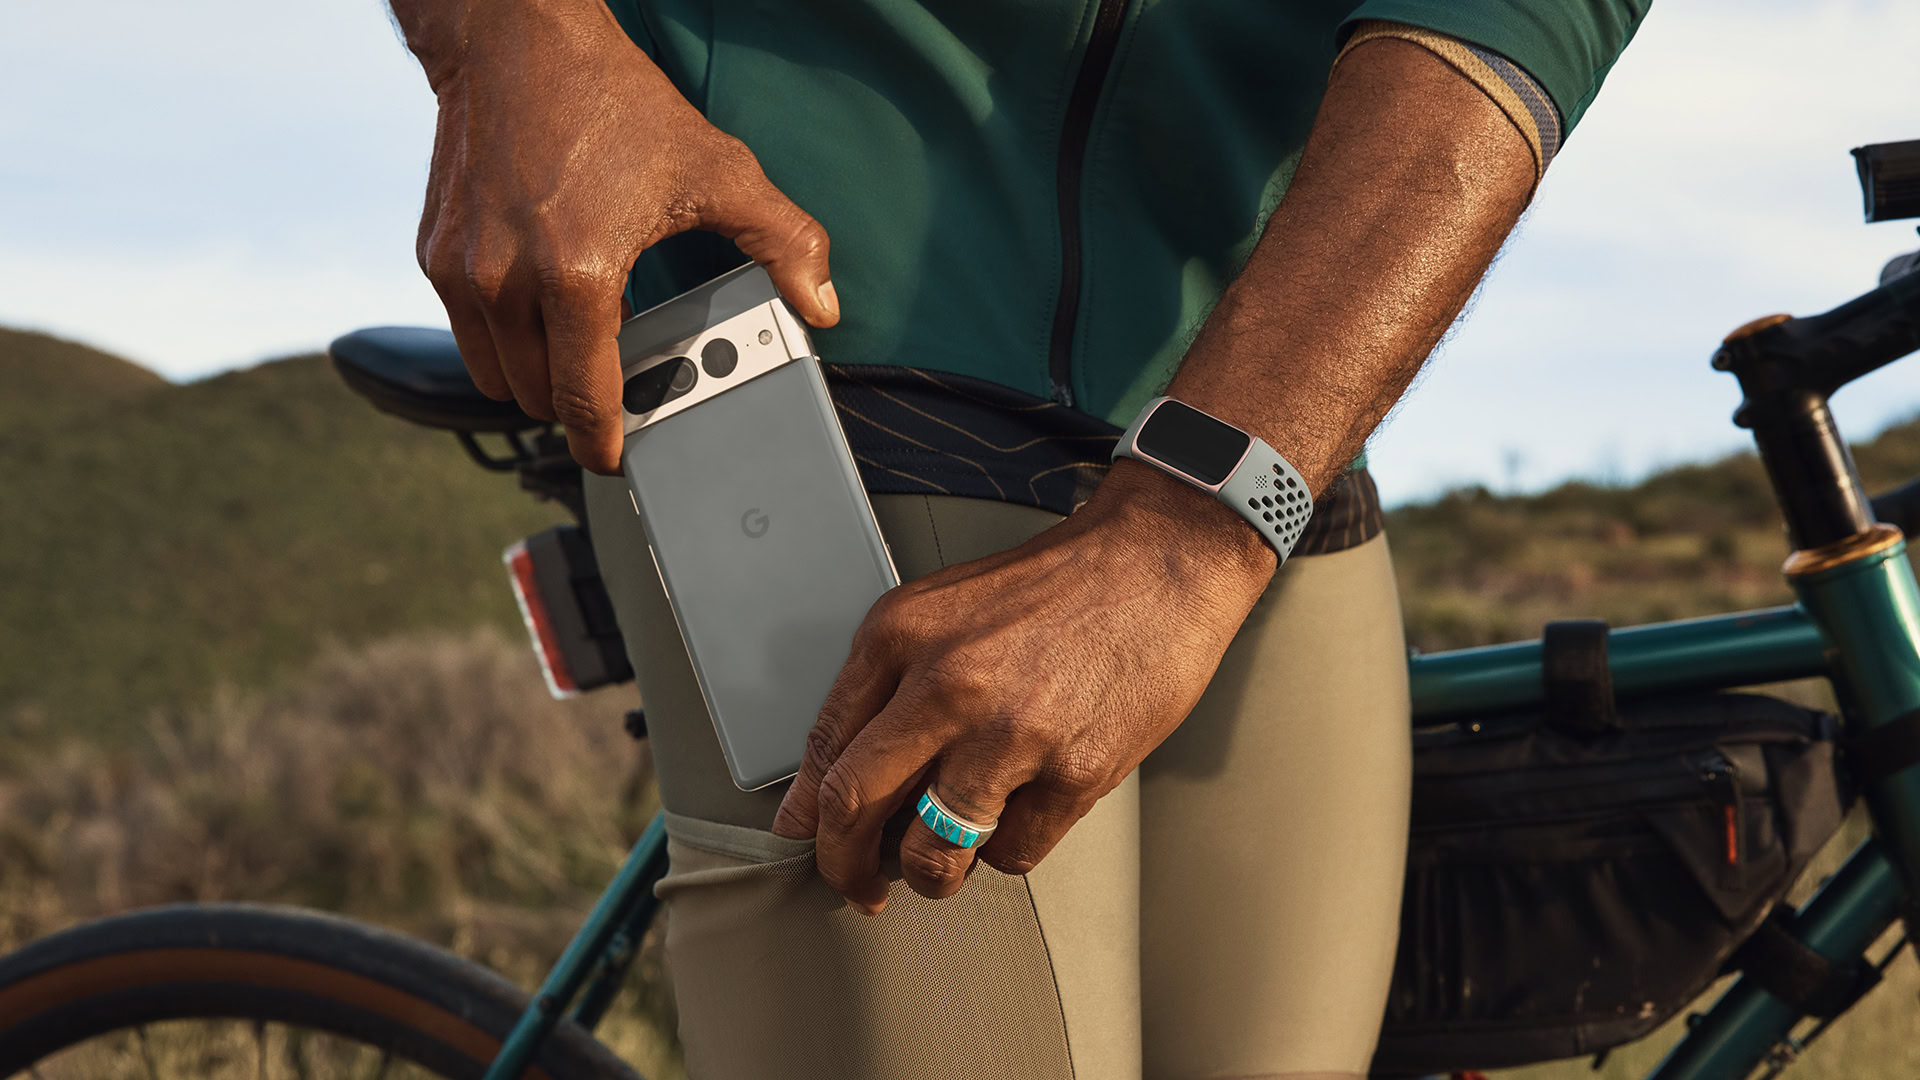 The new Charge 6 is proof that Google can improve Fitbit, not just